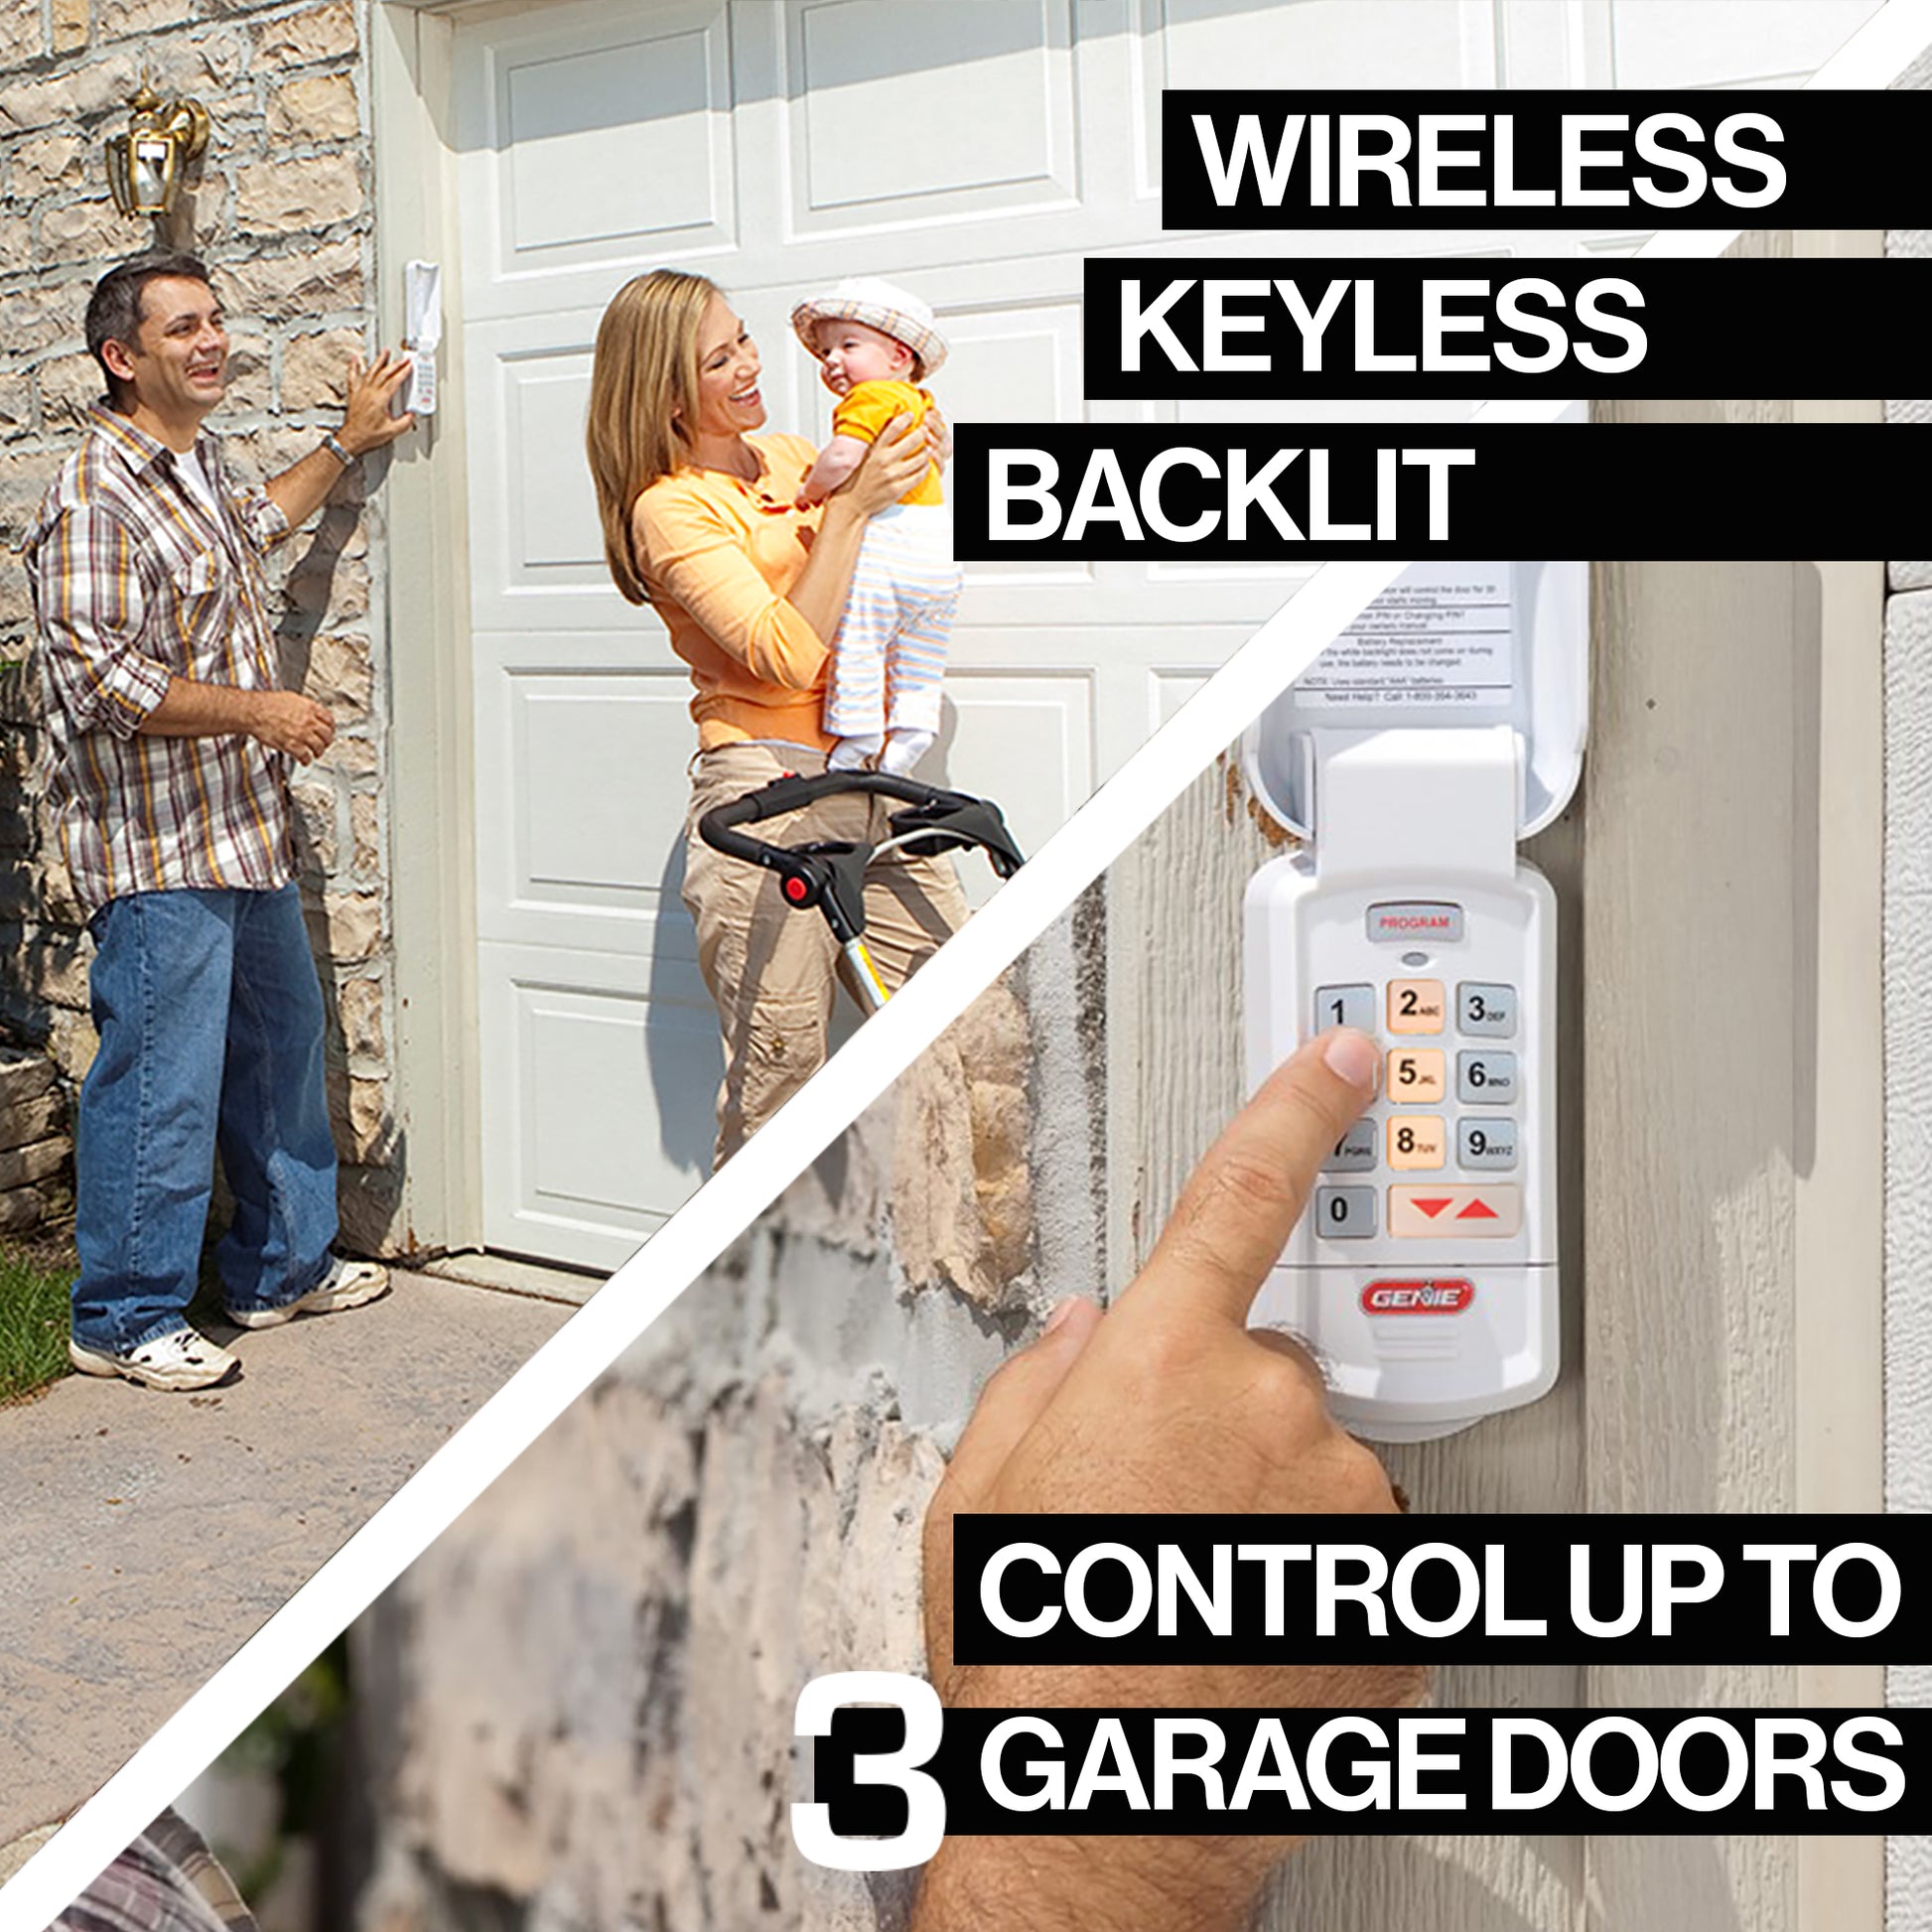 The Genie Wireless Keyless entry pad is backlit and can control up to three garage doors